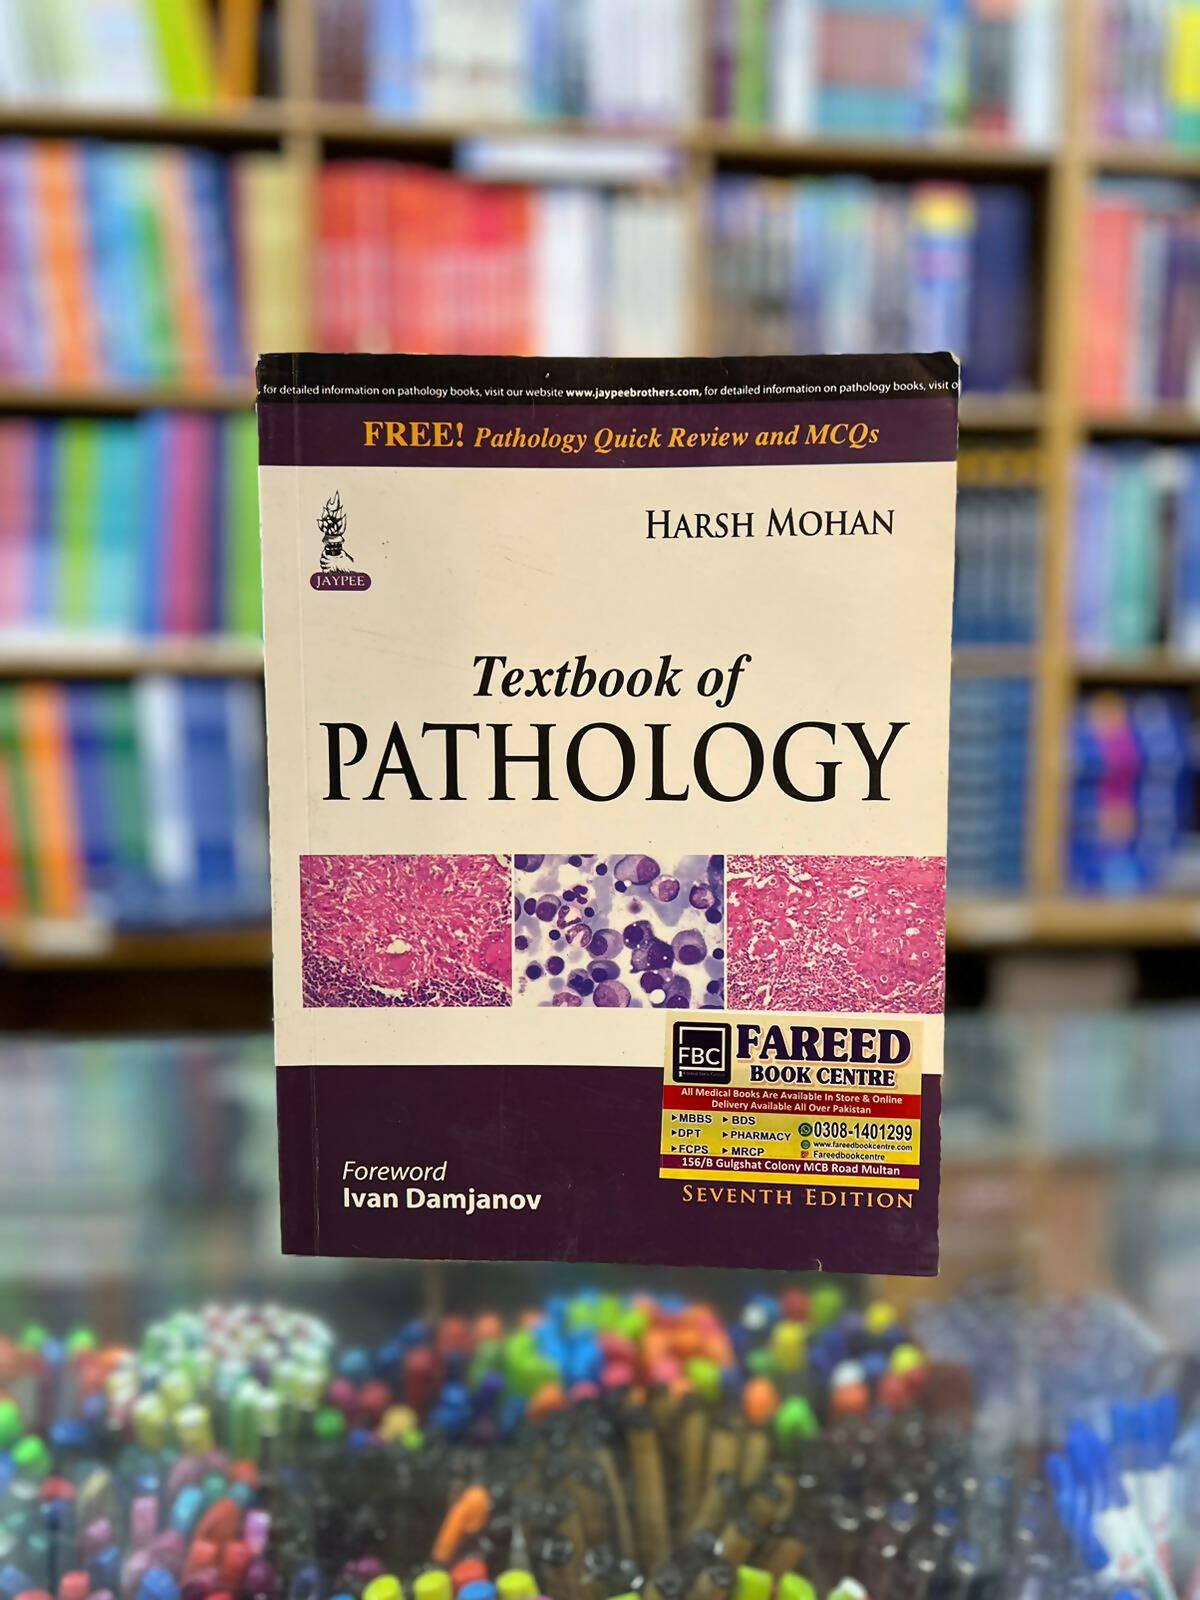 TEXTBOOK OF PATHOLOGY BY HARSH MOHAN 7TH EDITION - ValueBox